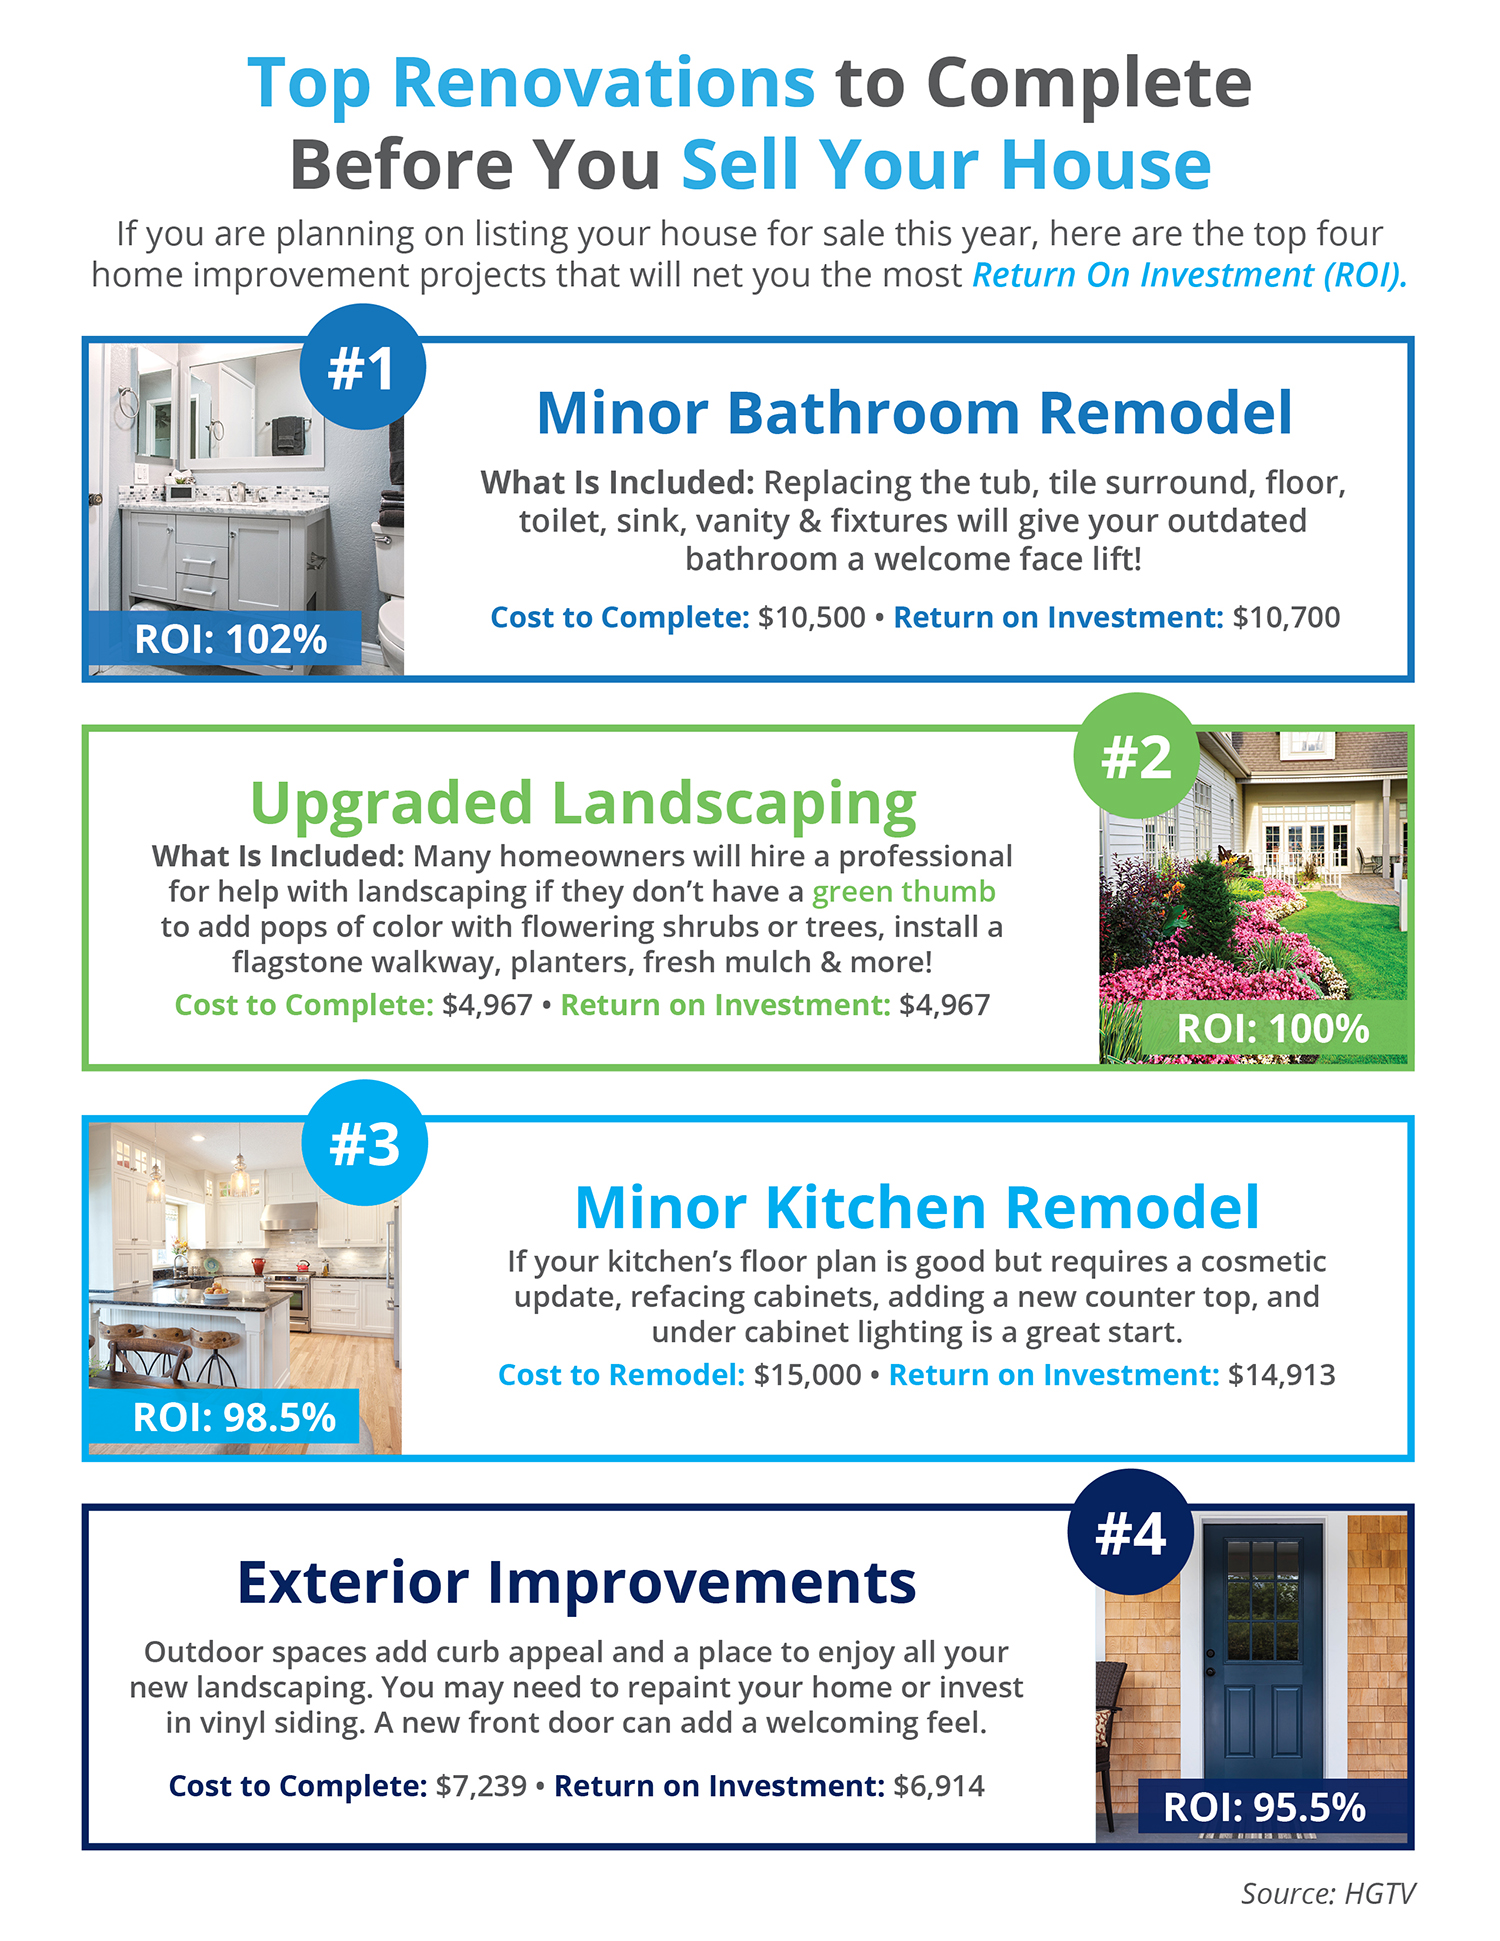 Top Renovations to Complete Before You Sell Your House [INFOGRAPHIC] | Simplifying The Market 